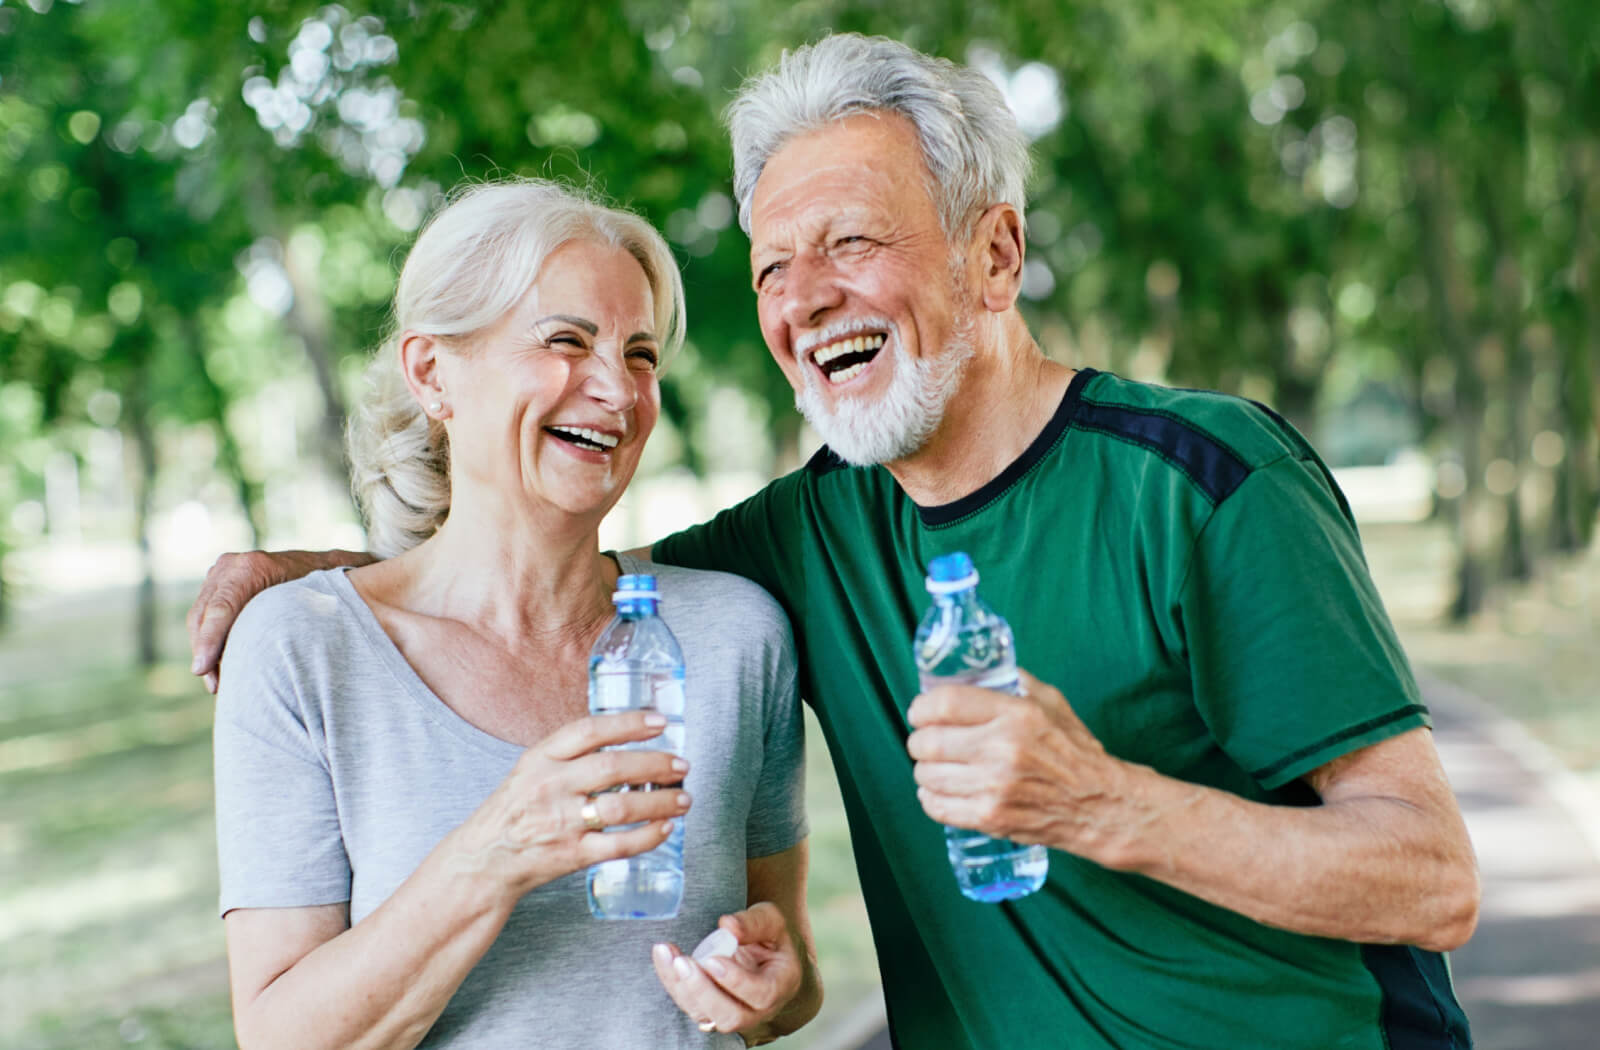 A happy older adult couple in active wear holding an opened bottle of water.